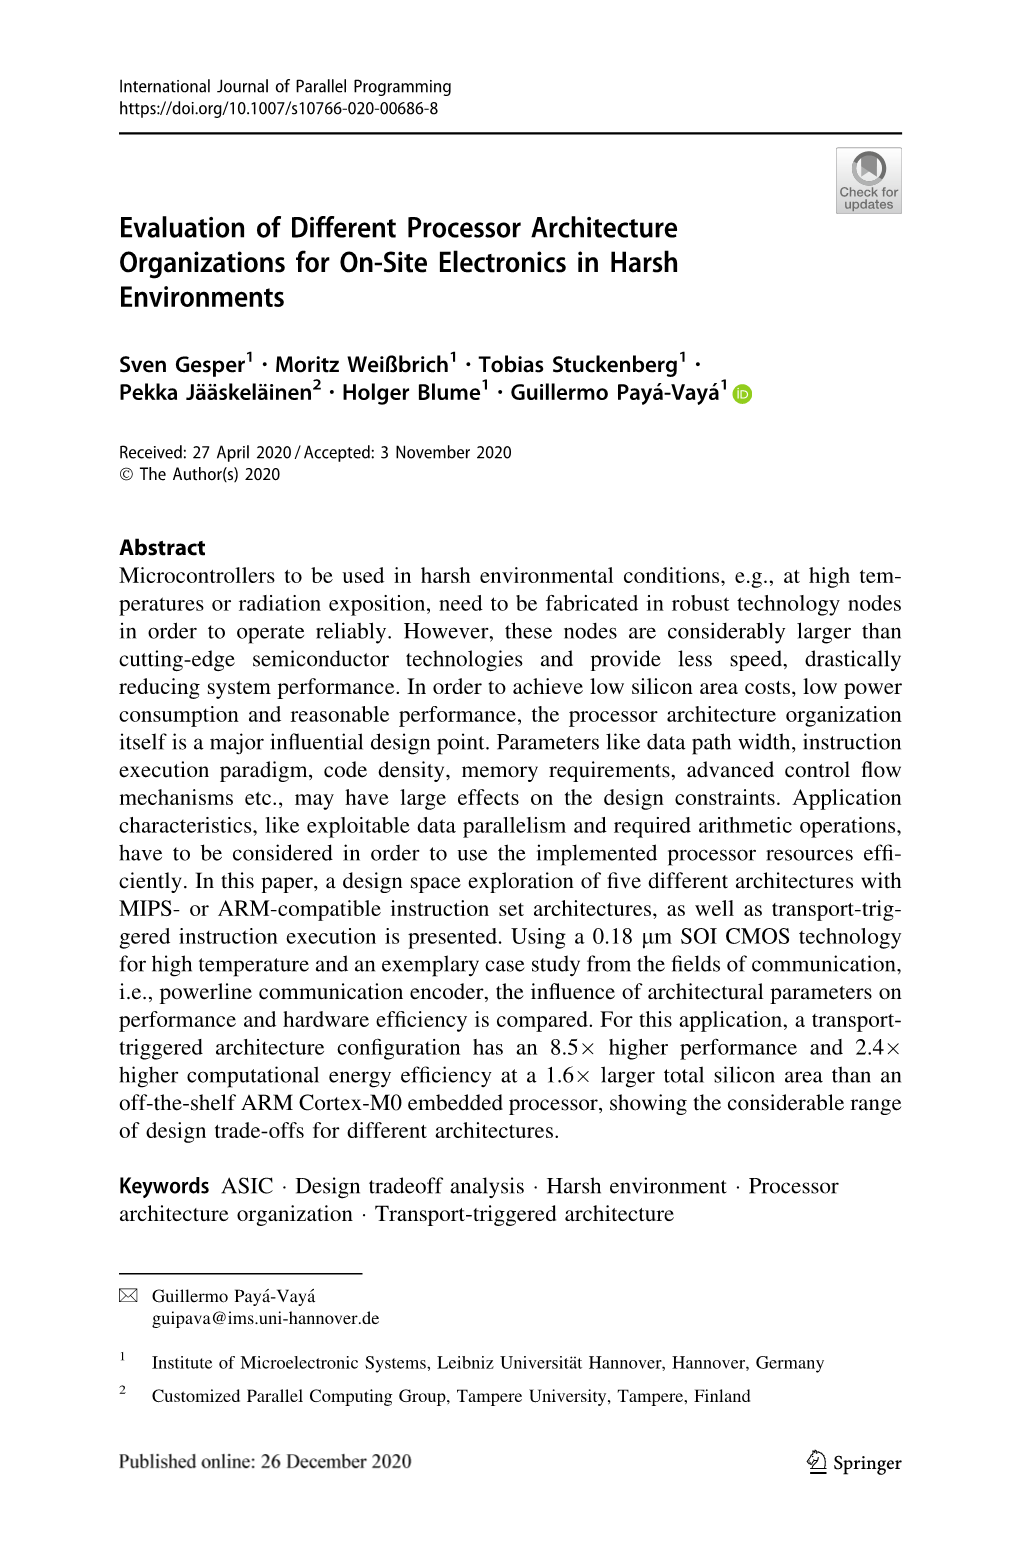 Evaluation of Different Processor Architecture Organizations for On-Site Electronics in Harsh Environments